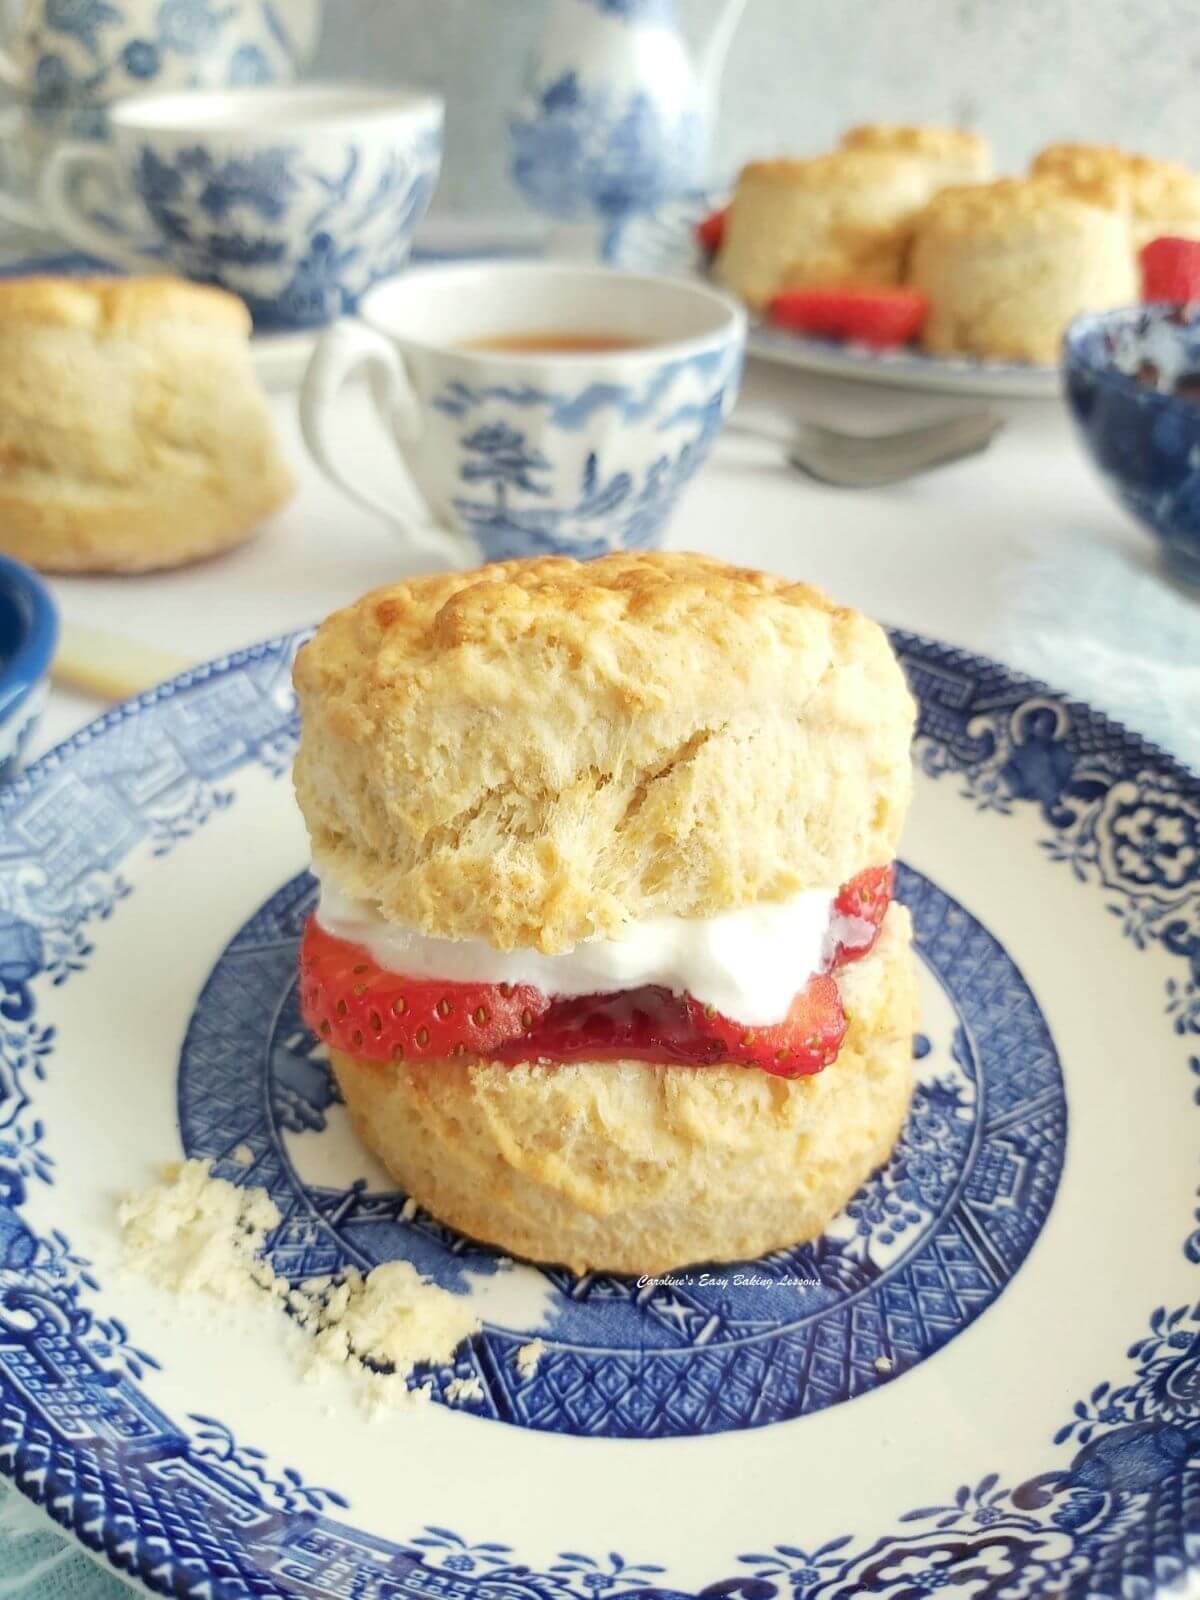 Close photo of a British scone with cream, jam and strawberry sliced in-between, serve don blue & white Willow tea set and more scones and tea to the background.